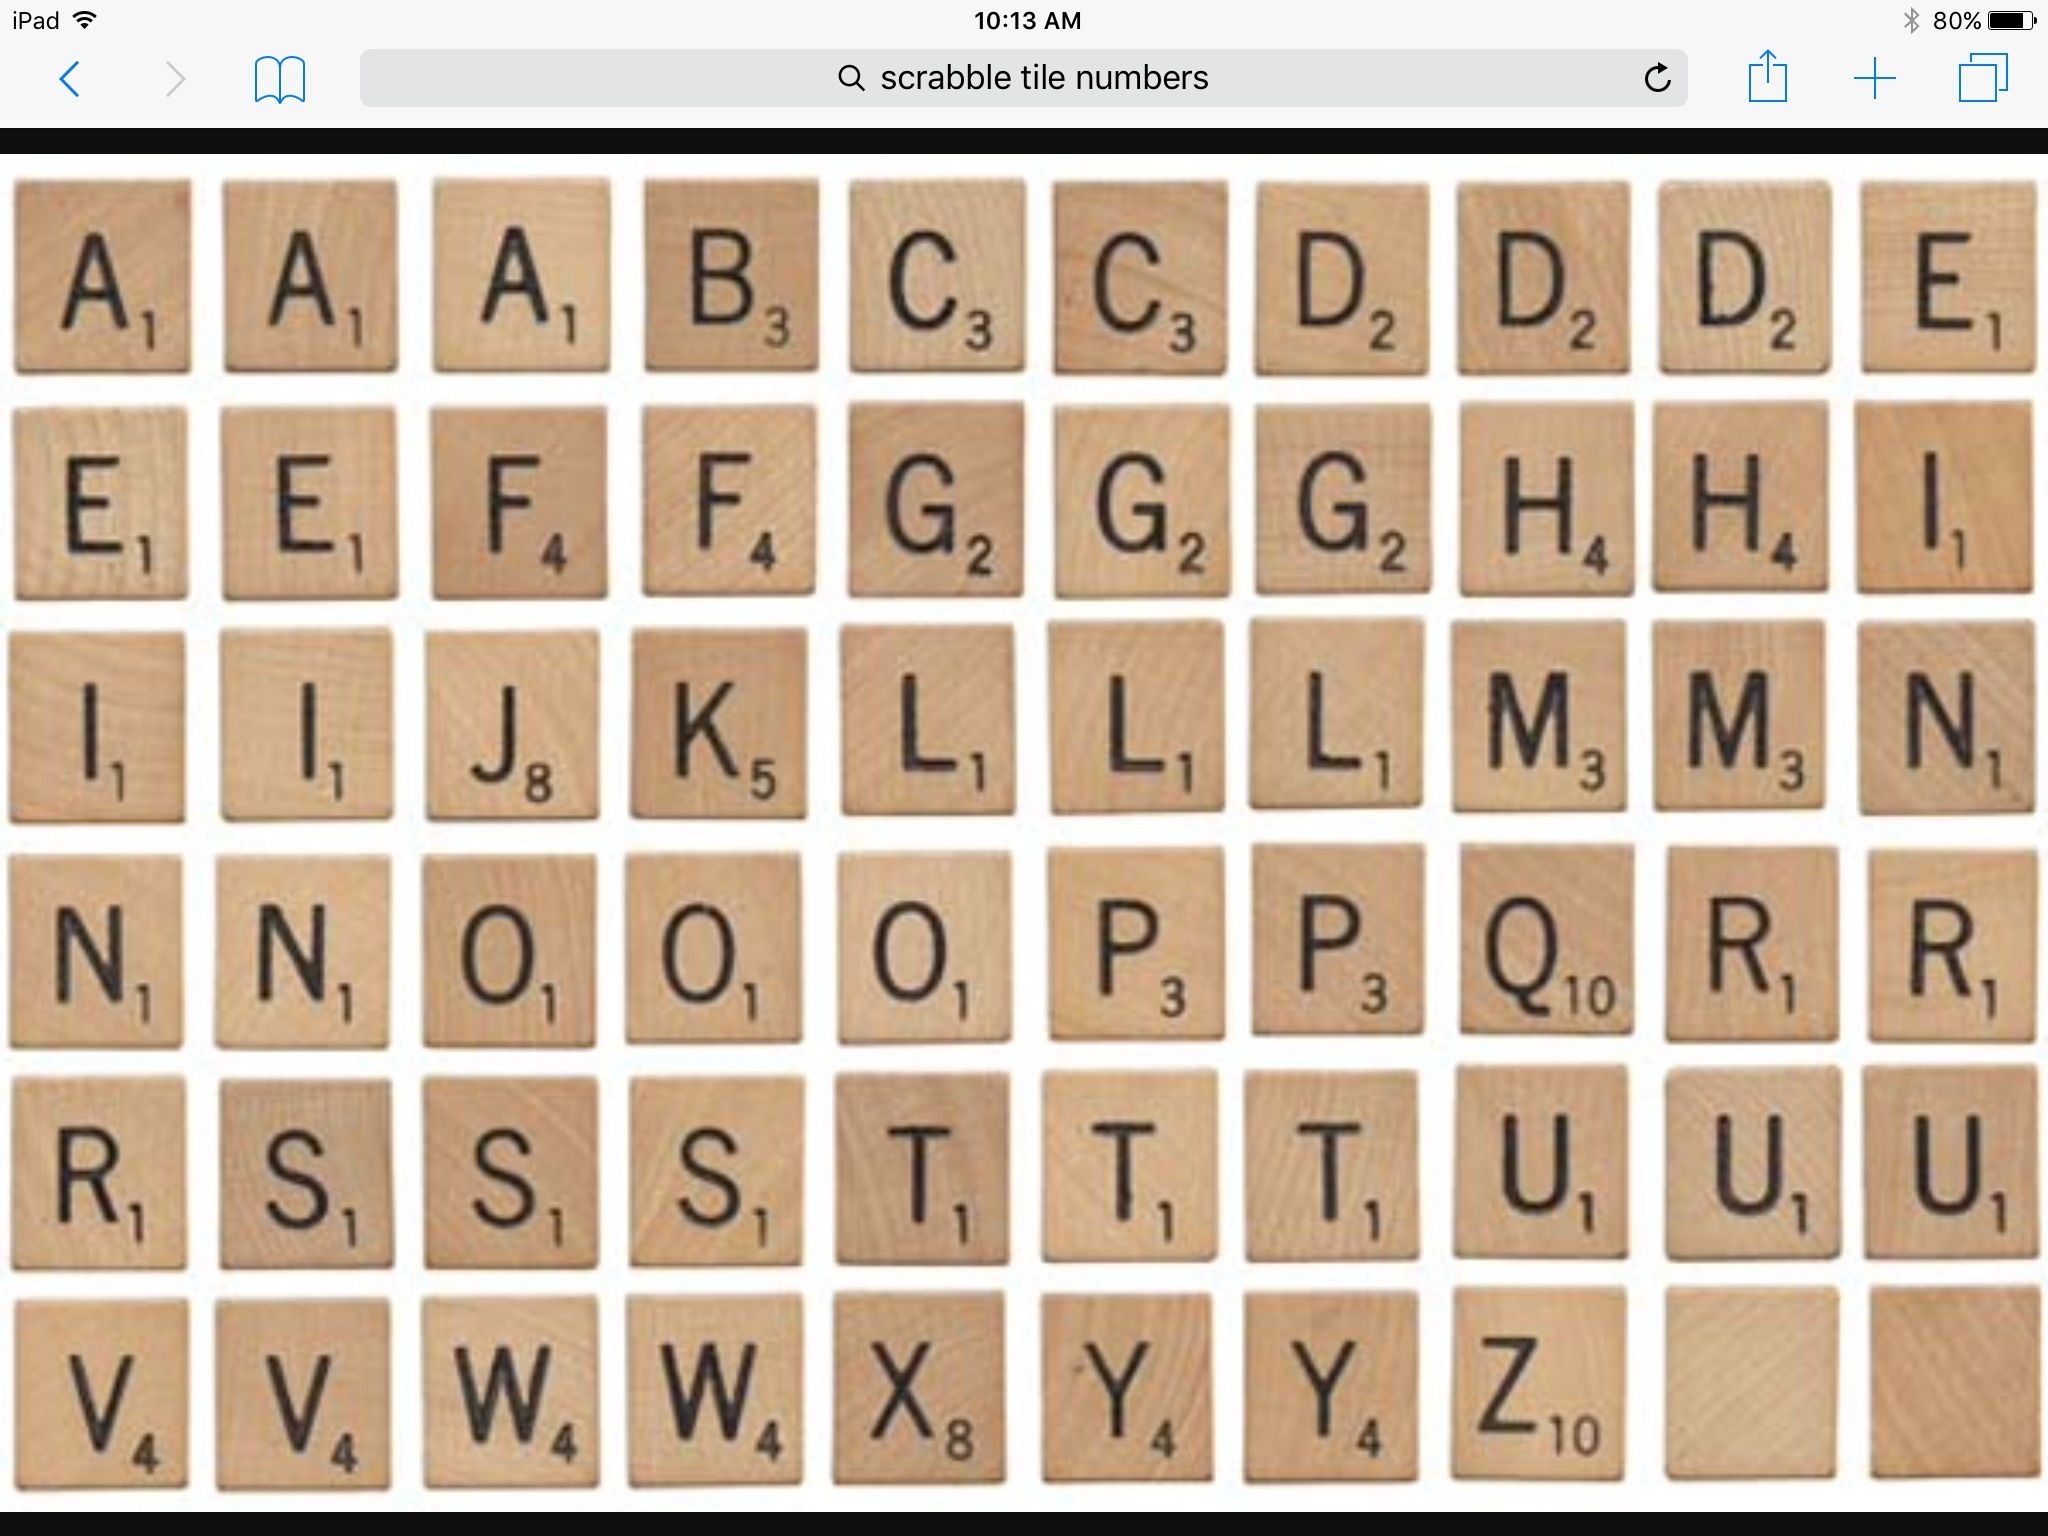 Official Distribution Chart For Scramble Scrabble Letters Part Of Free Printable Scrabble 